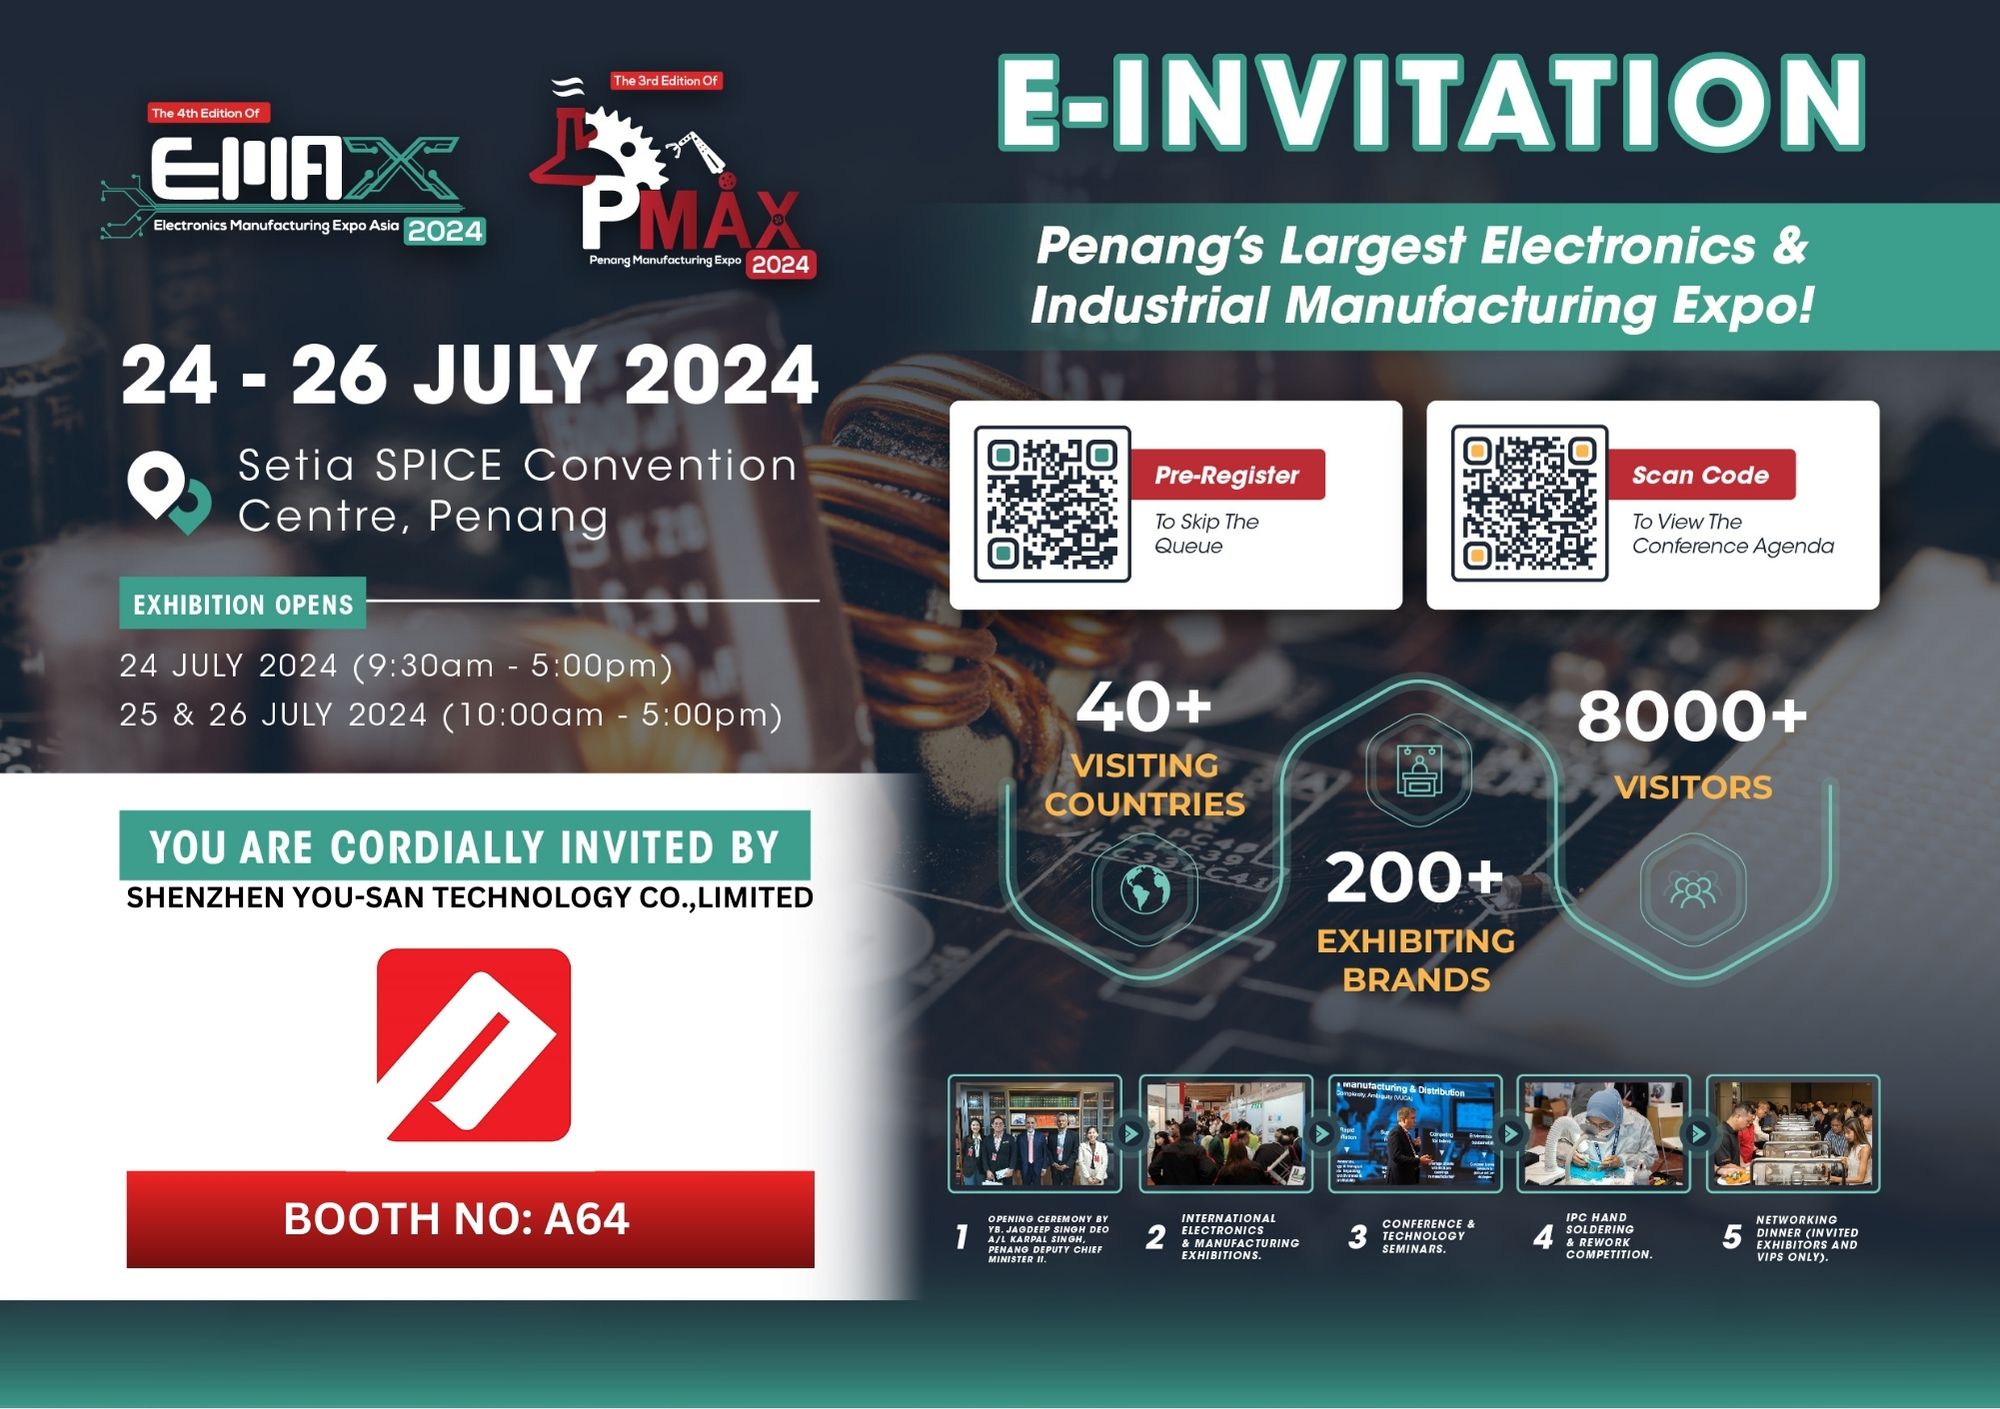 Yousan has attended The Electronic Manufacturing Expo Asia  in Penang, Malaysia in July 24-26, 2024.